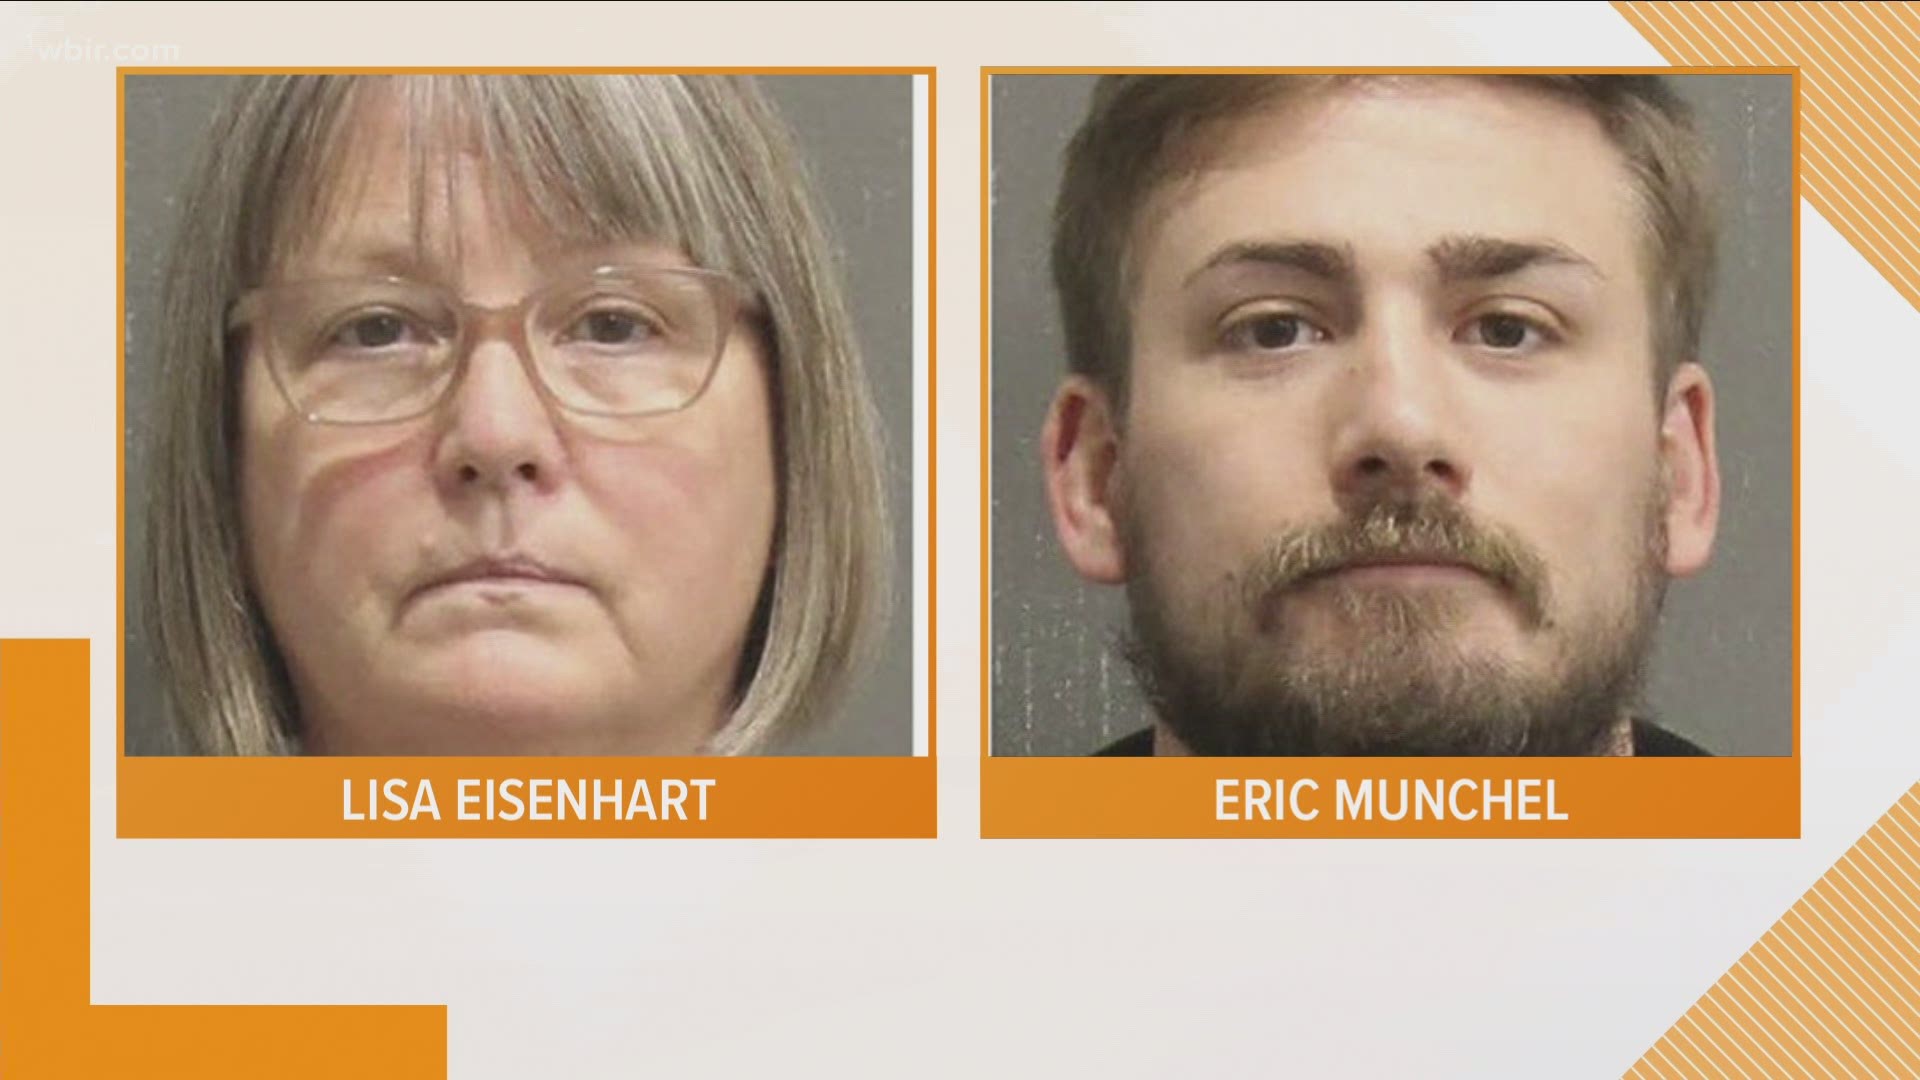 Eric Munchel, better known as "Zip Tie Guy", and his mother Lisa Eisenhart are accused of breaking into the Capitol.